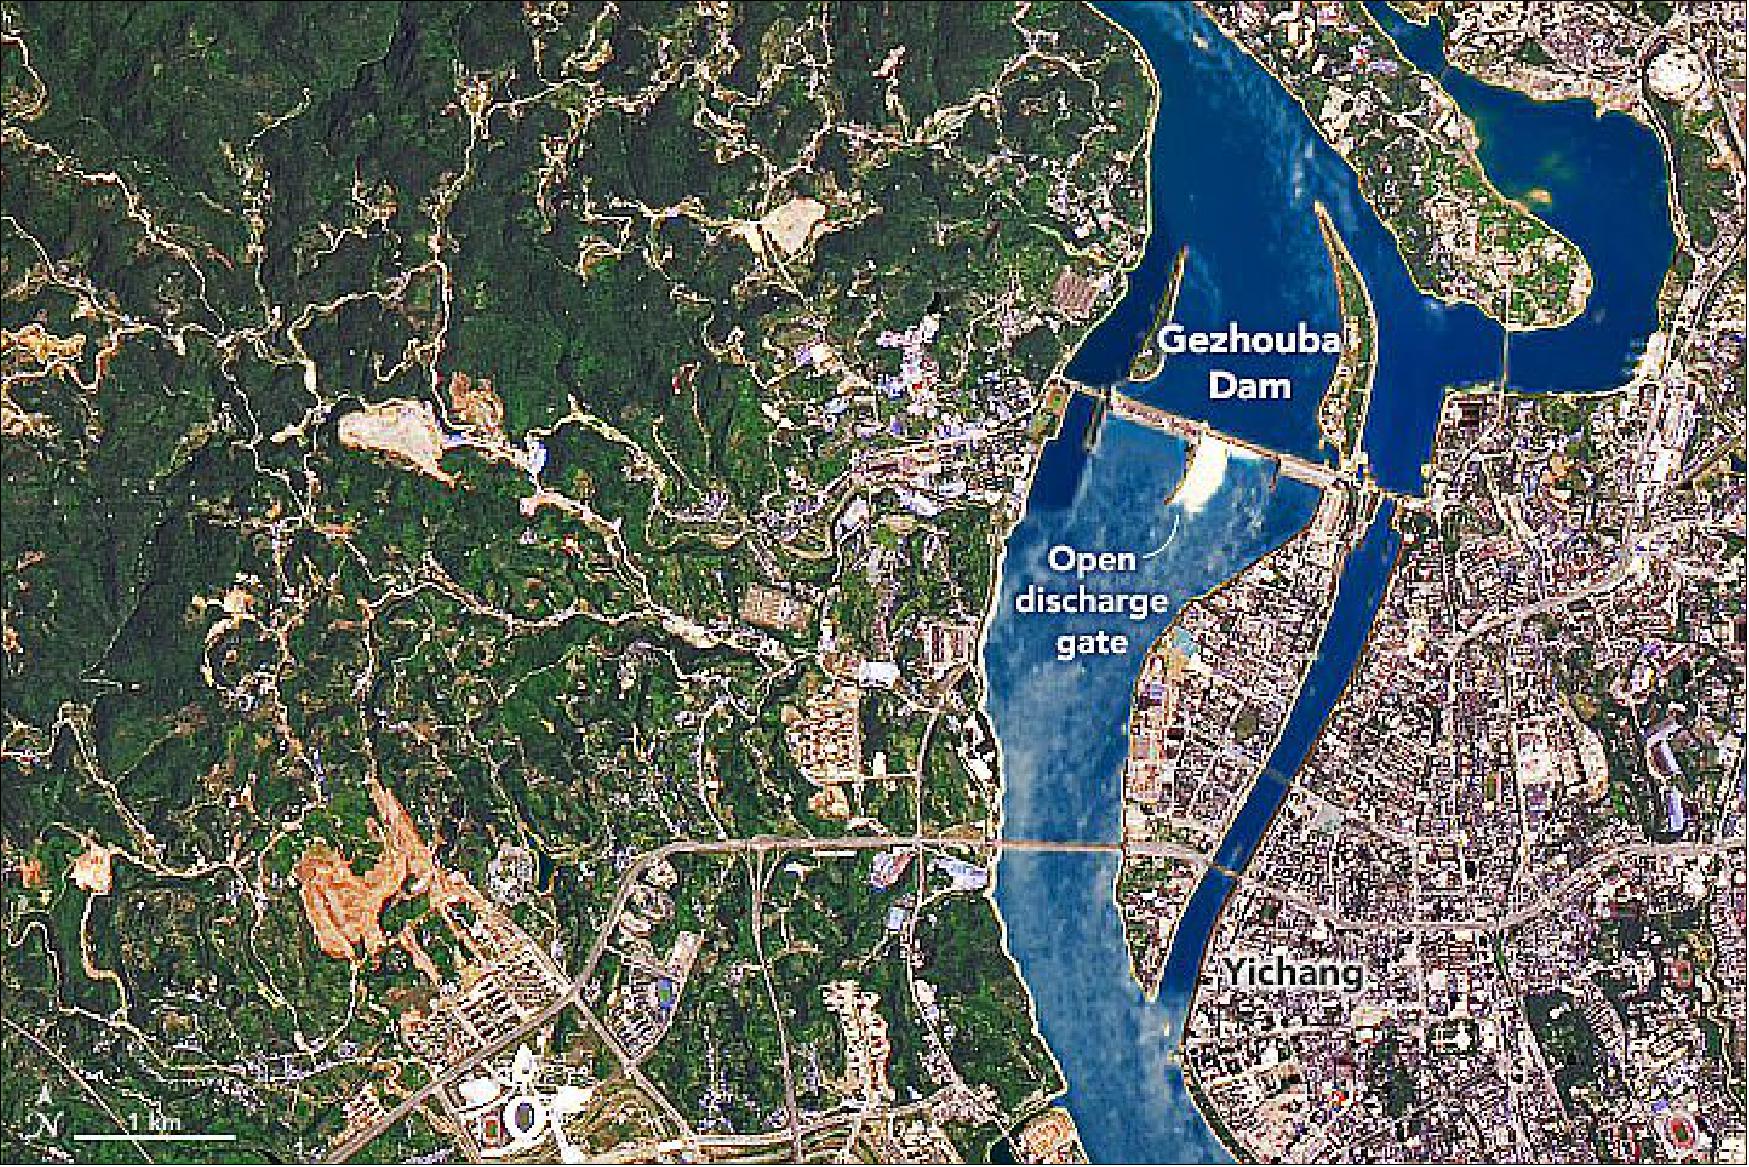 Figure 63: The image shows the smaller Gezhouba Dam, located about 26 km (16 miles) southeast from Three Gorges. This dam also appeared to have its spillway gates open (image credit: NASA Earth Observatory)